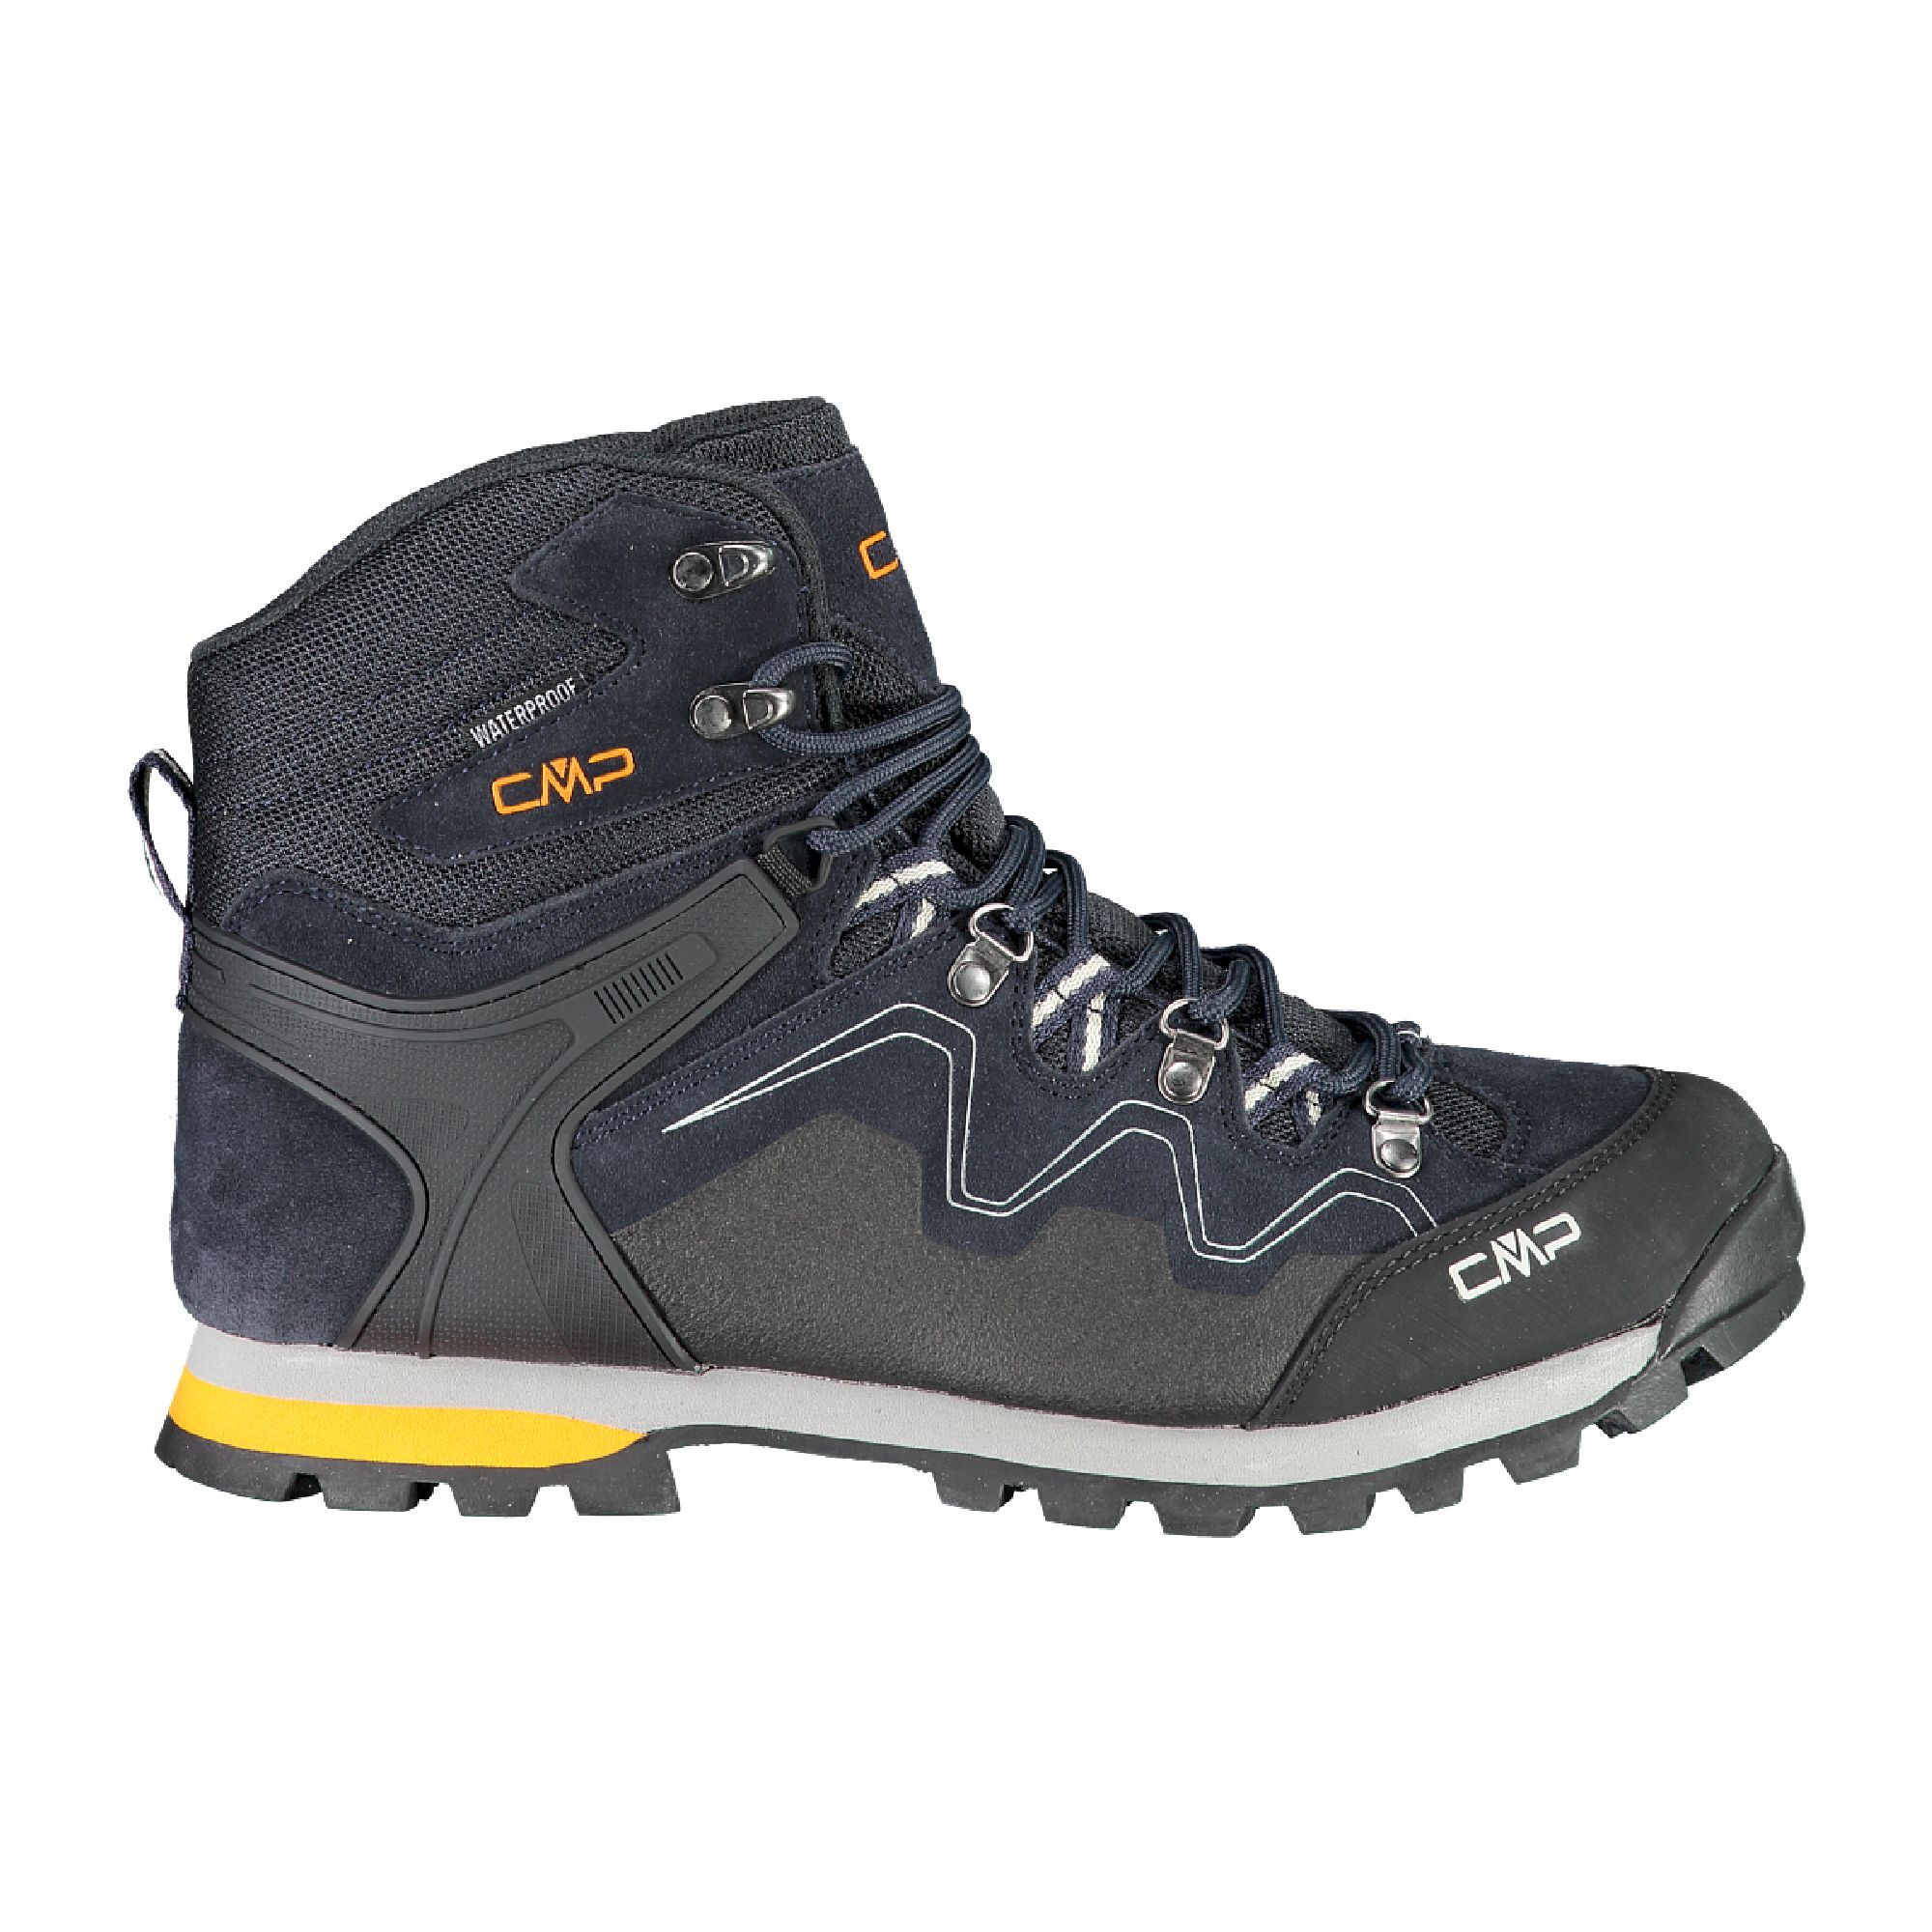 CMP Athunis Mid WP - Hiking boots - Men's | Hardloop